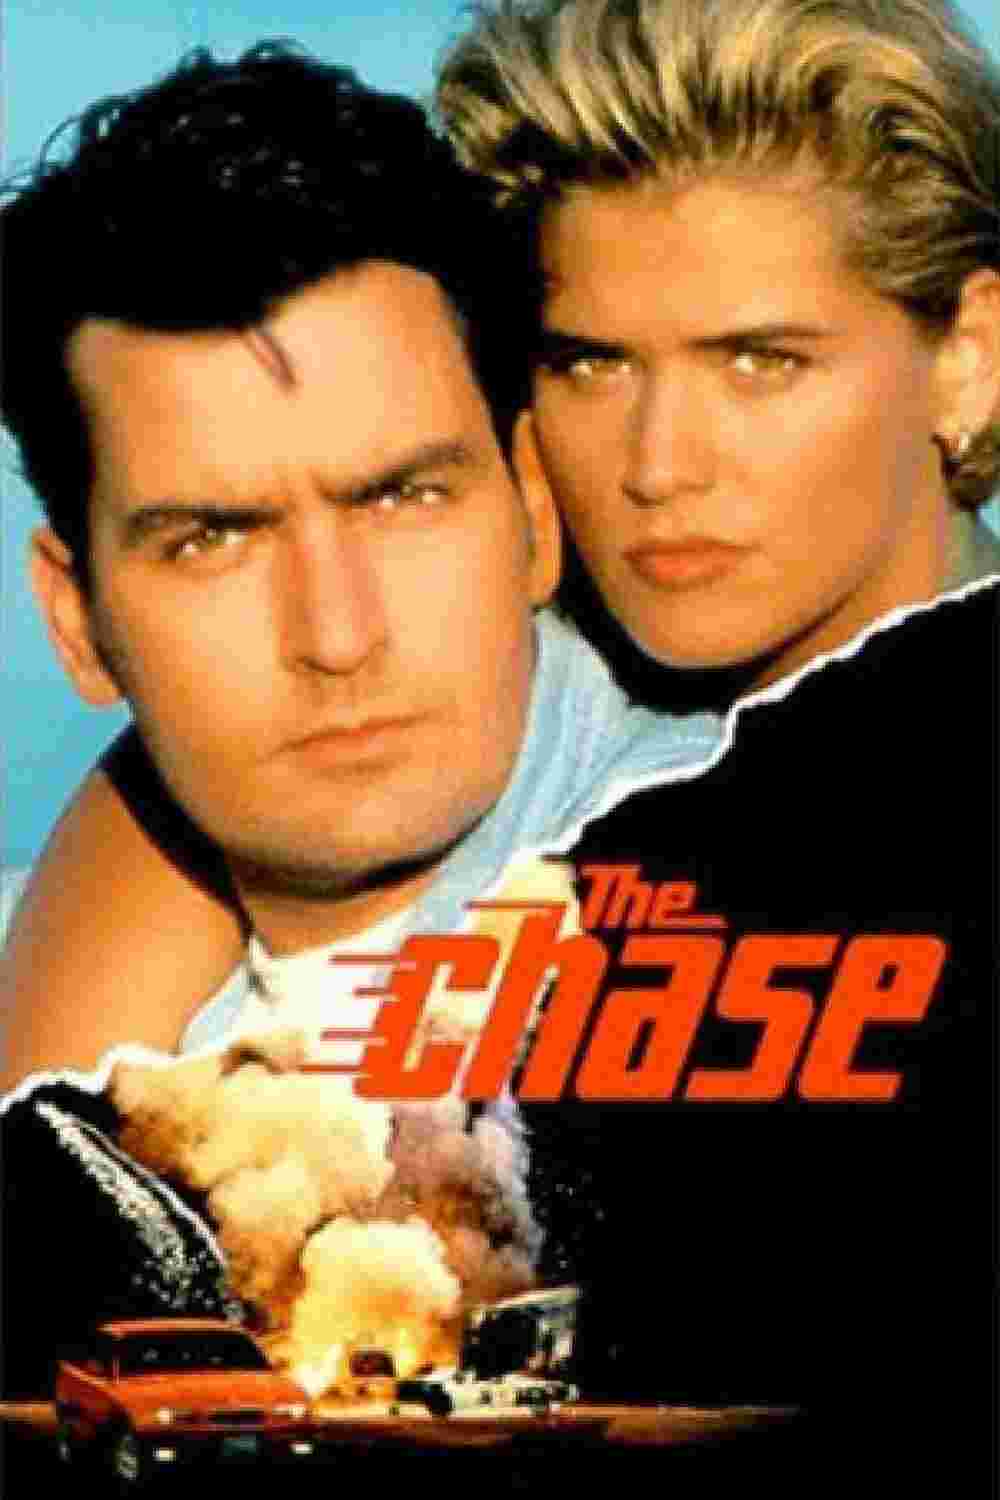 The Chase (1994) Charlie Sheen